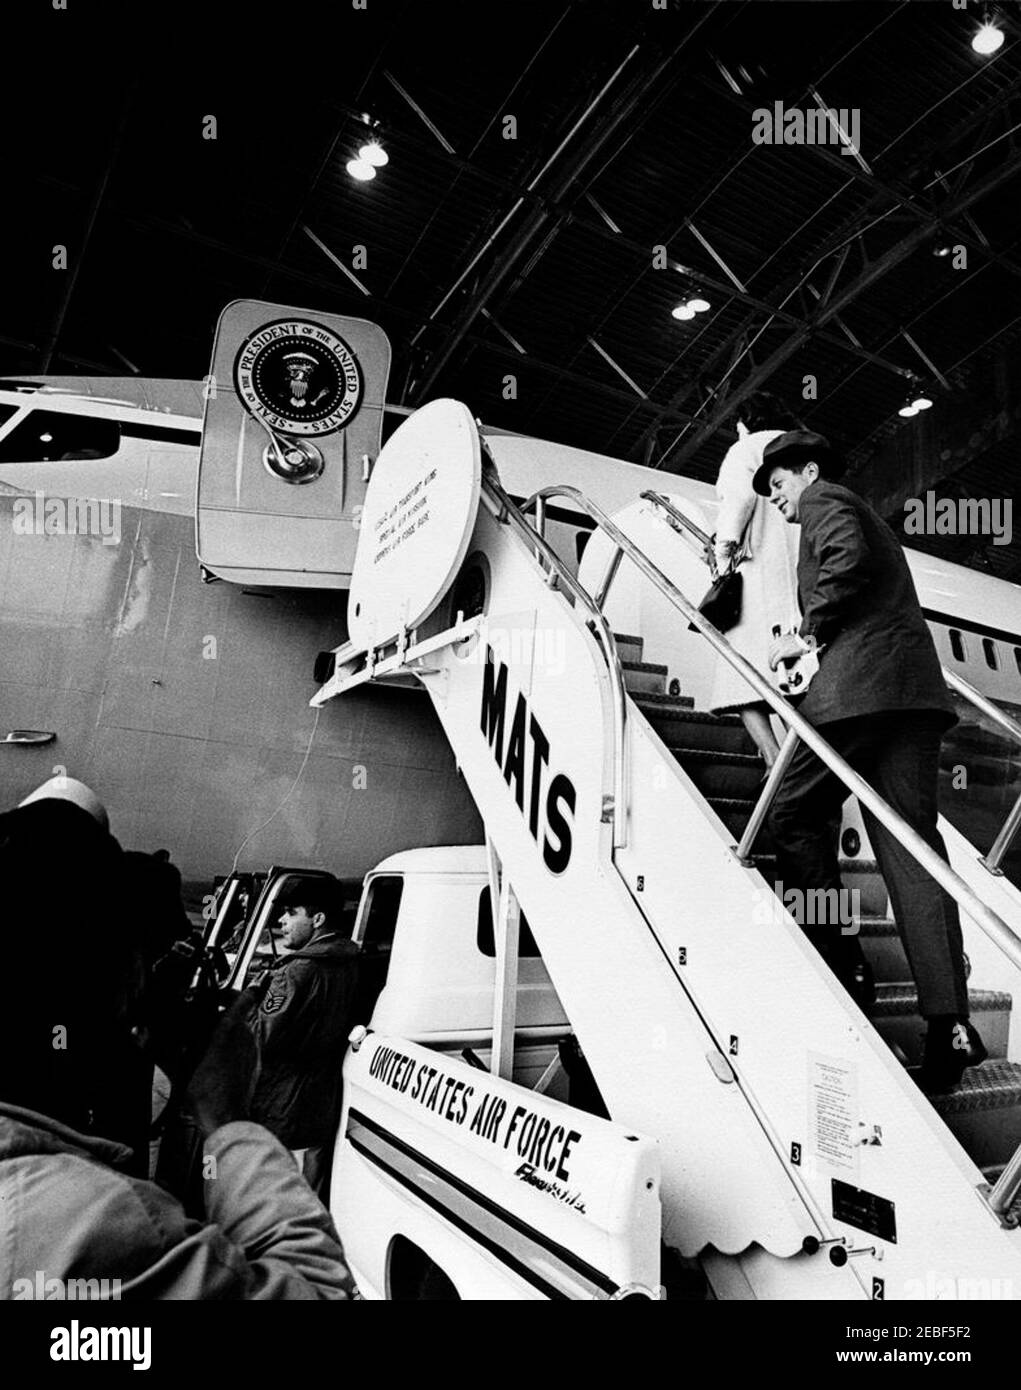 President Kennedy departs Andrews Air Force Base for West Palm Beach, Florida, 12:10PM. President John F. Kennedy (wearing a hat) and First Lady Jacqueline Kennedy board Air Force One inside hangar at Andrews Air Force Base in Maryland, for flight to West Palm Beach, Florida. Stock Photo